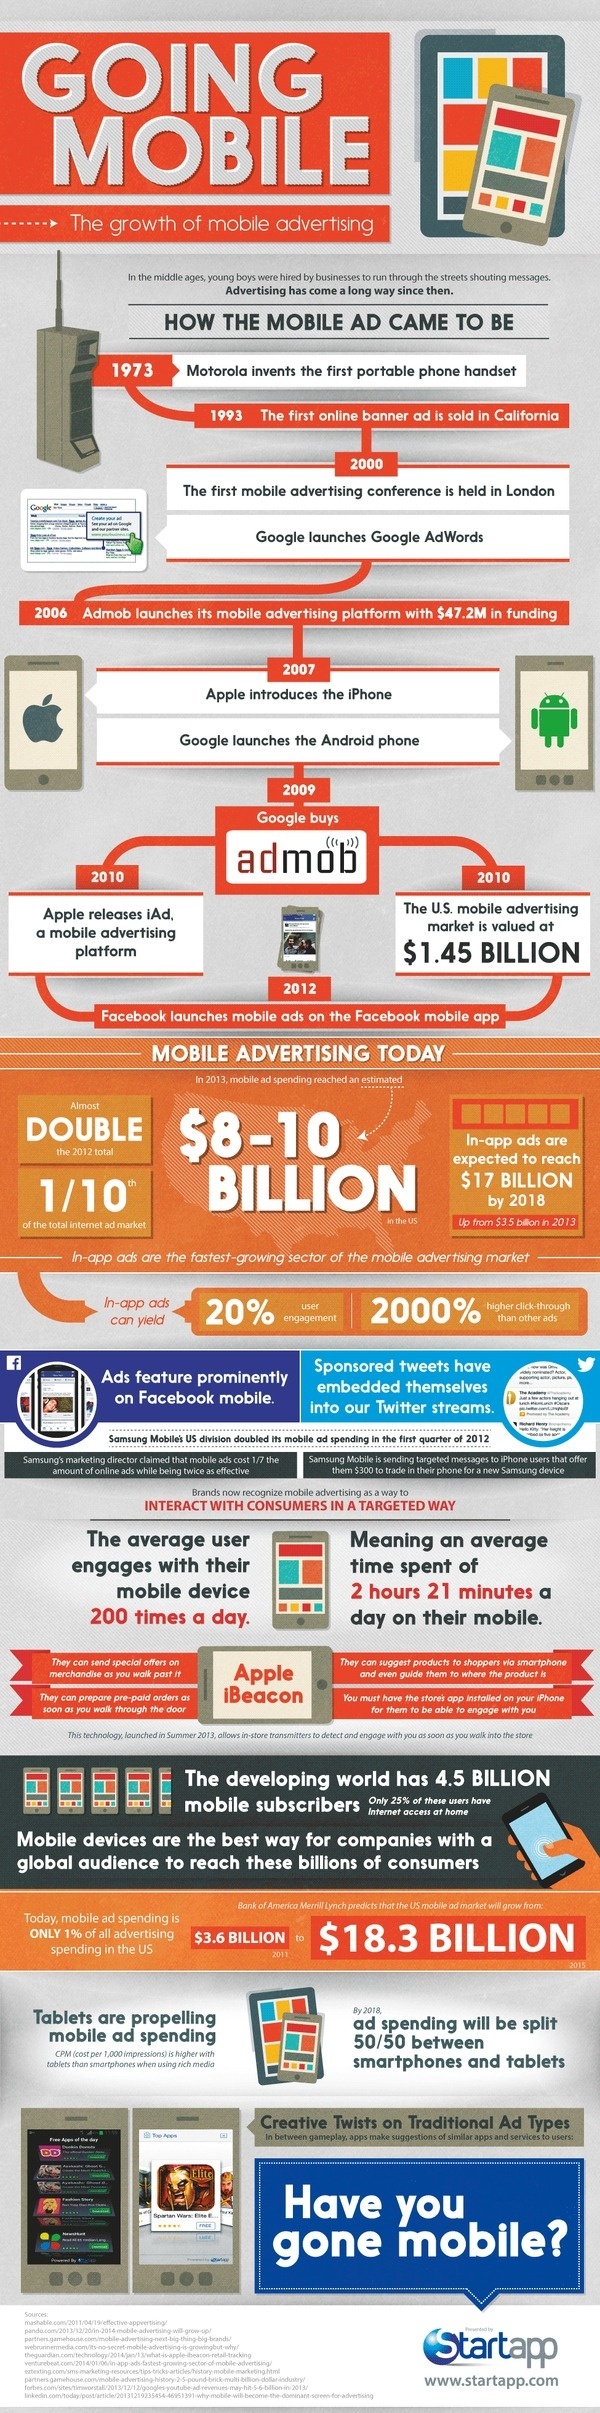 The Growth of Mobile Advertising #infographic